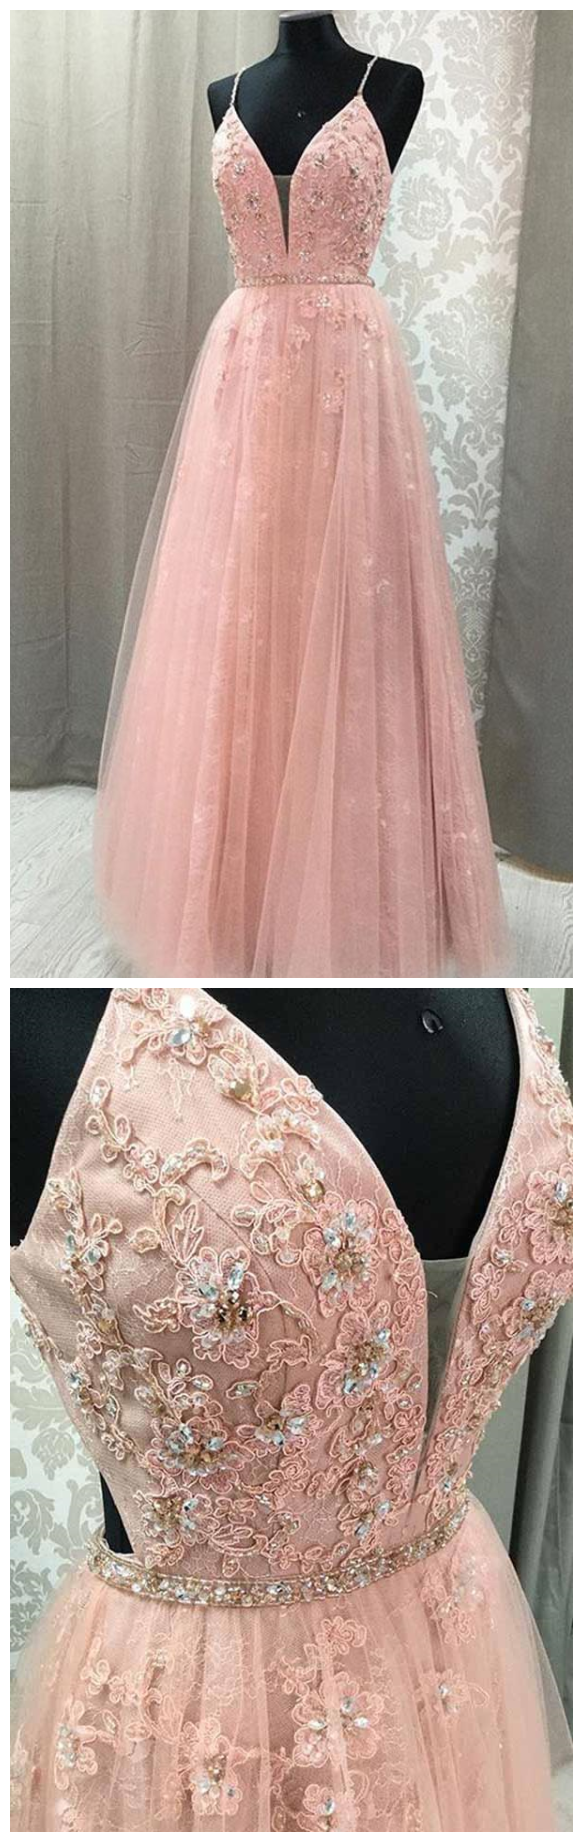 Blush V Neck Prom Dress With Rhinestone, Long Prom Dresses With Appliques